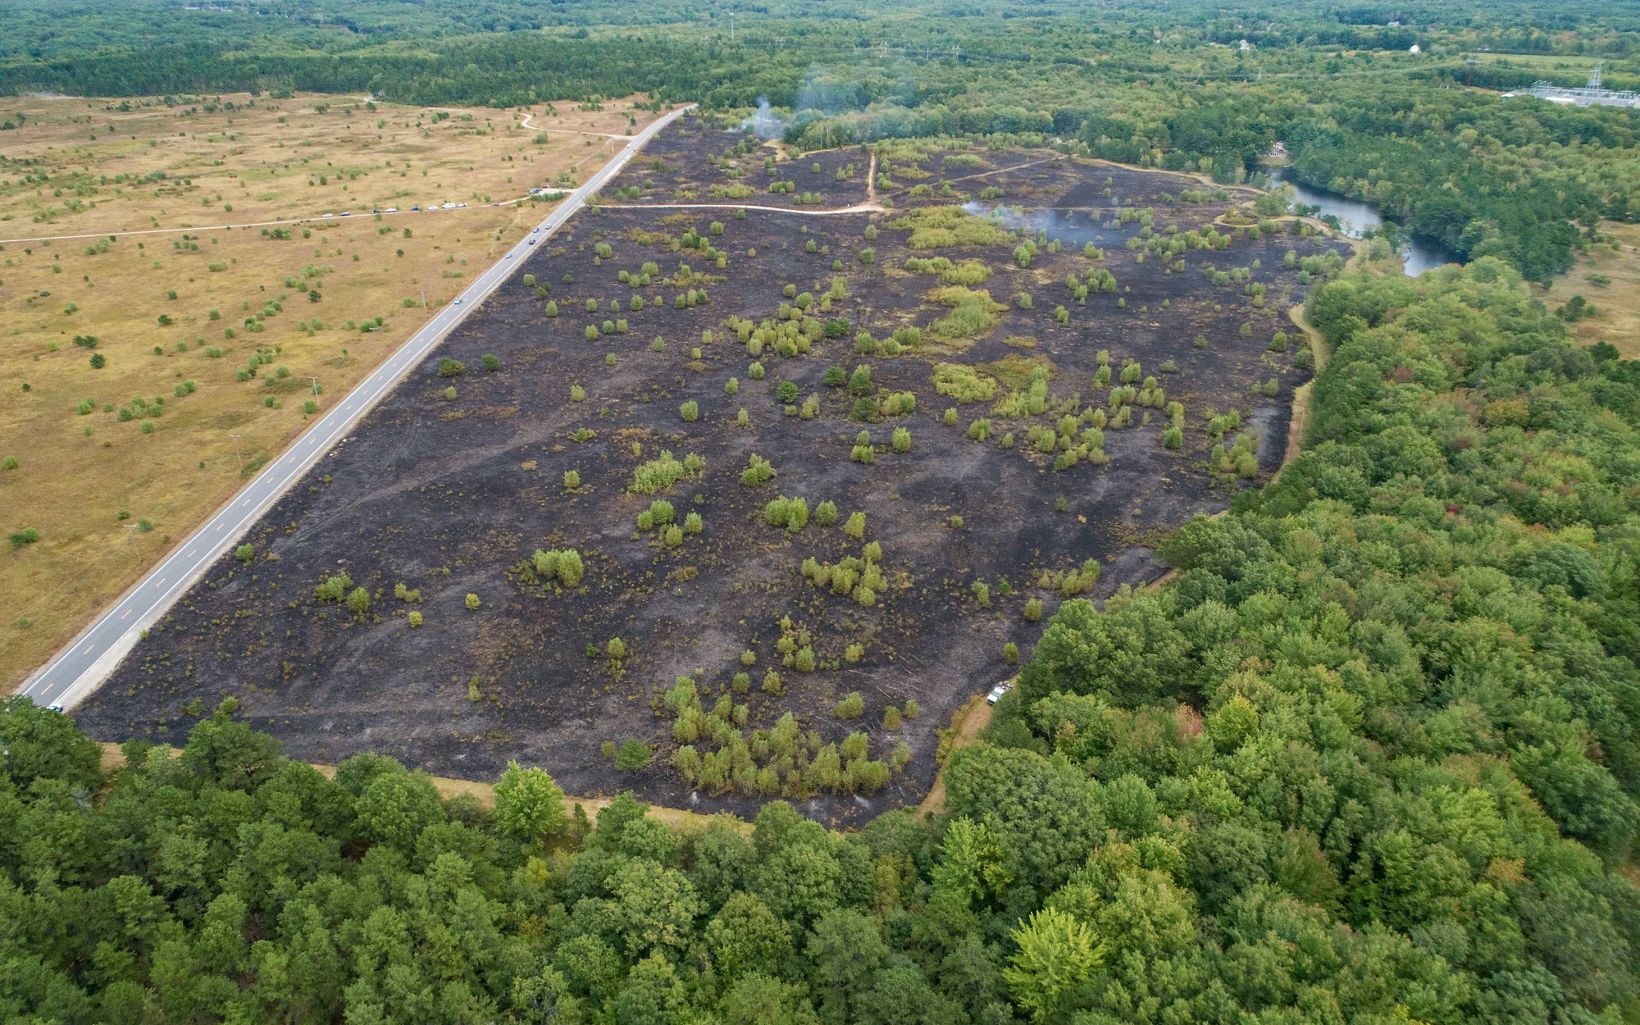 An aerial view after a controlled burn on the grassland at The Nature Conservancy's Kennebunk Plains Preserve.